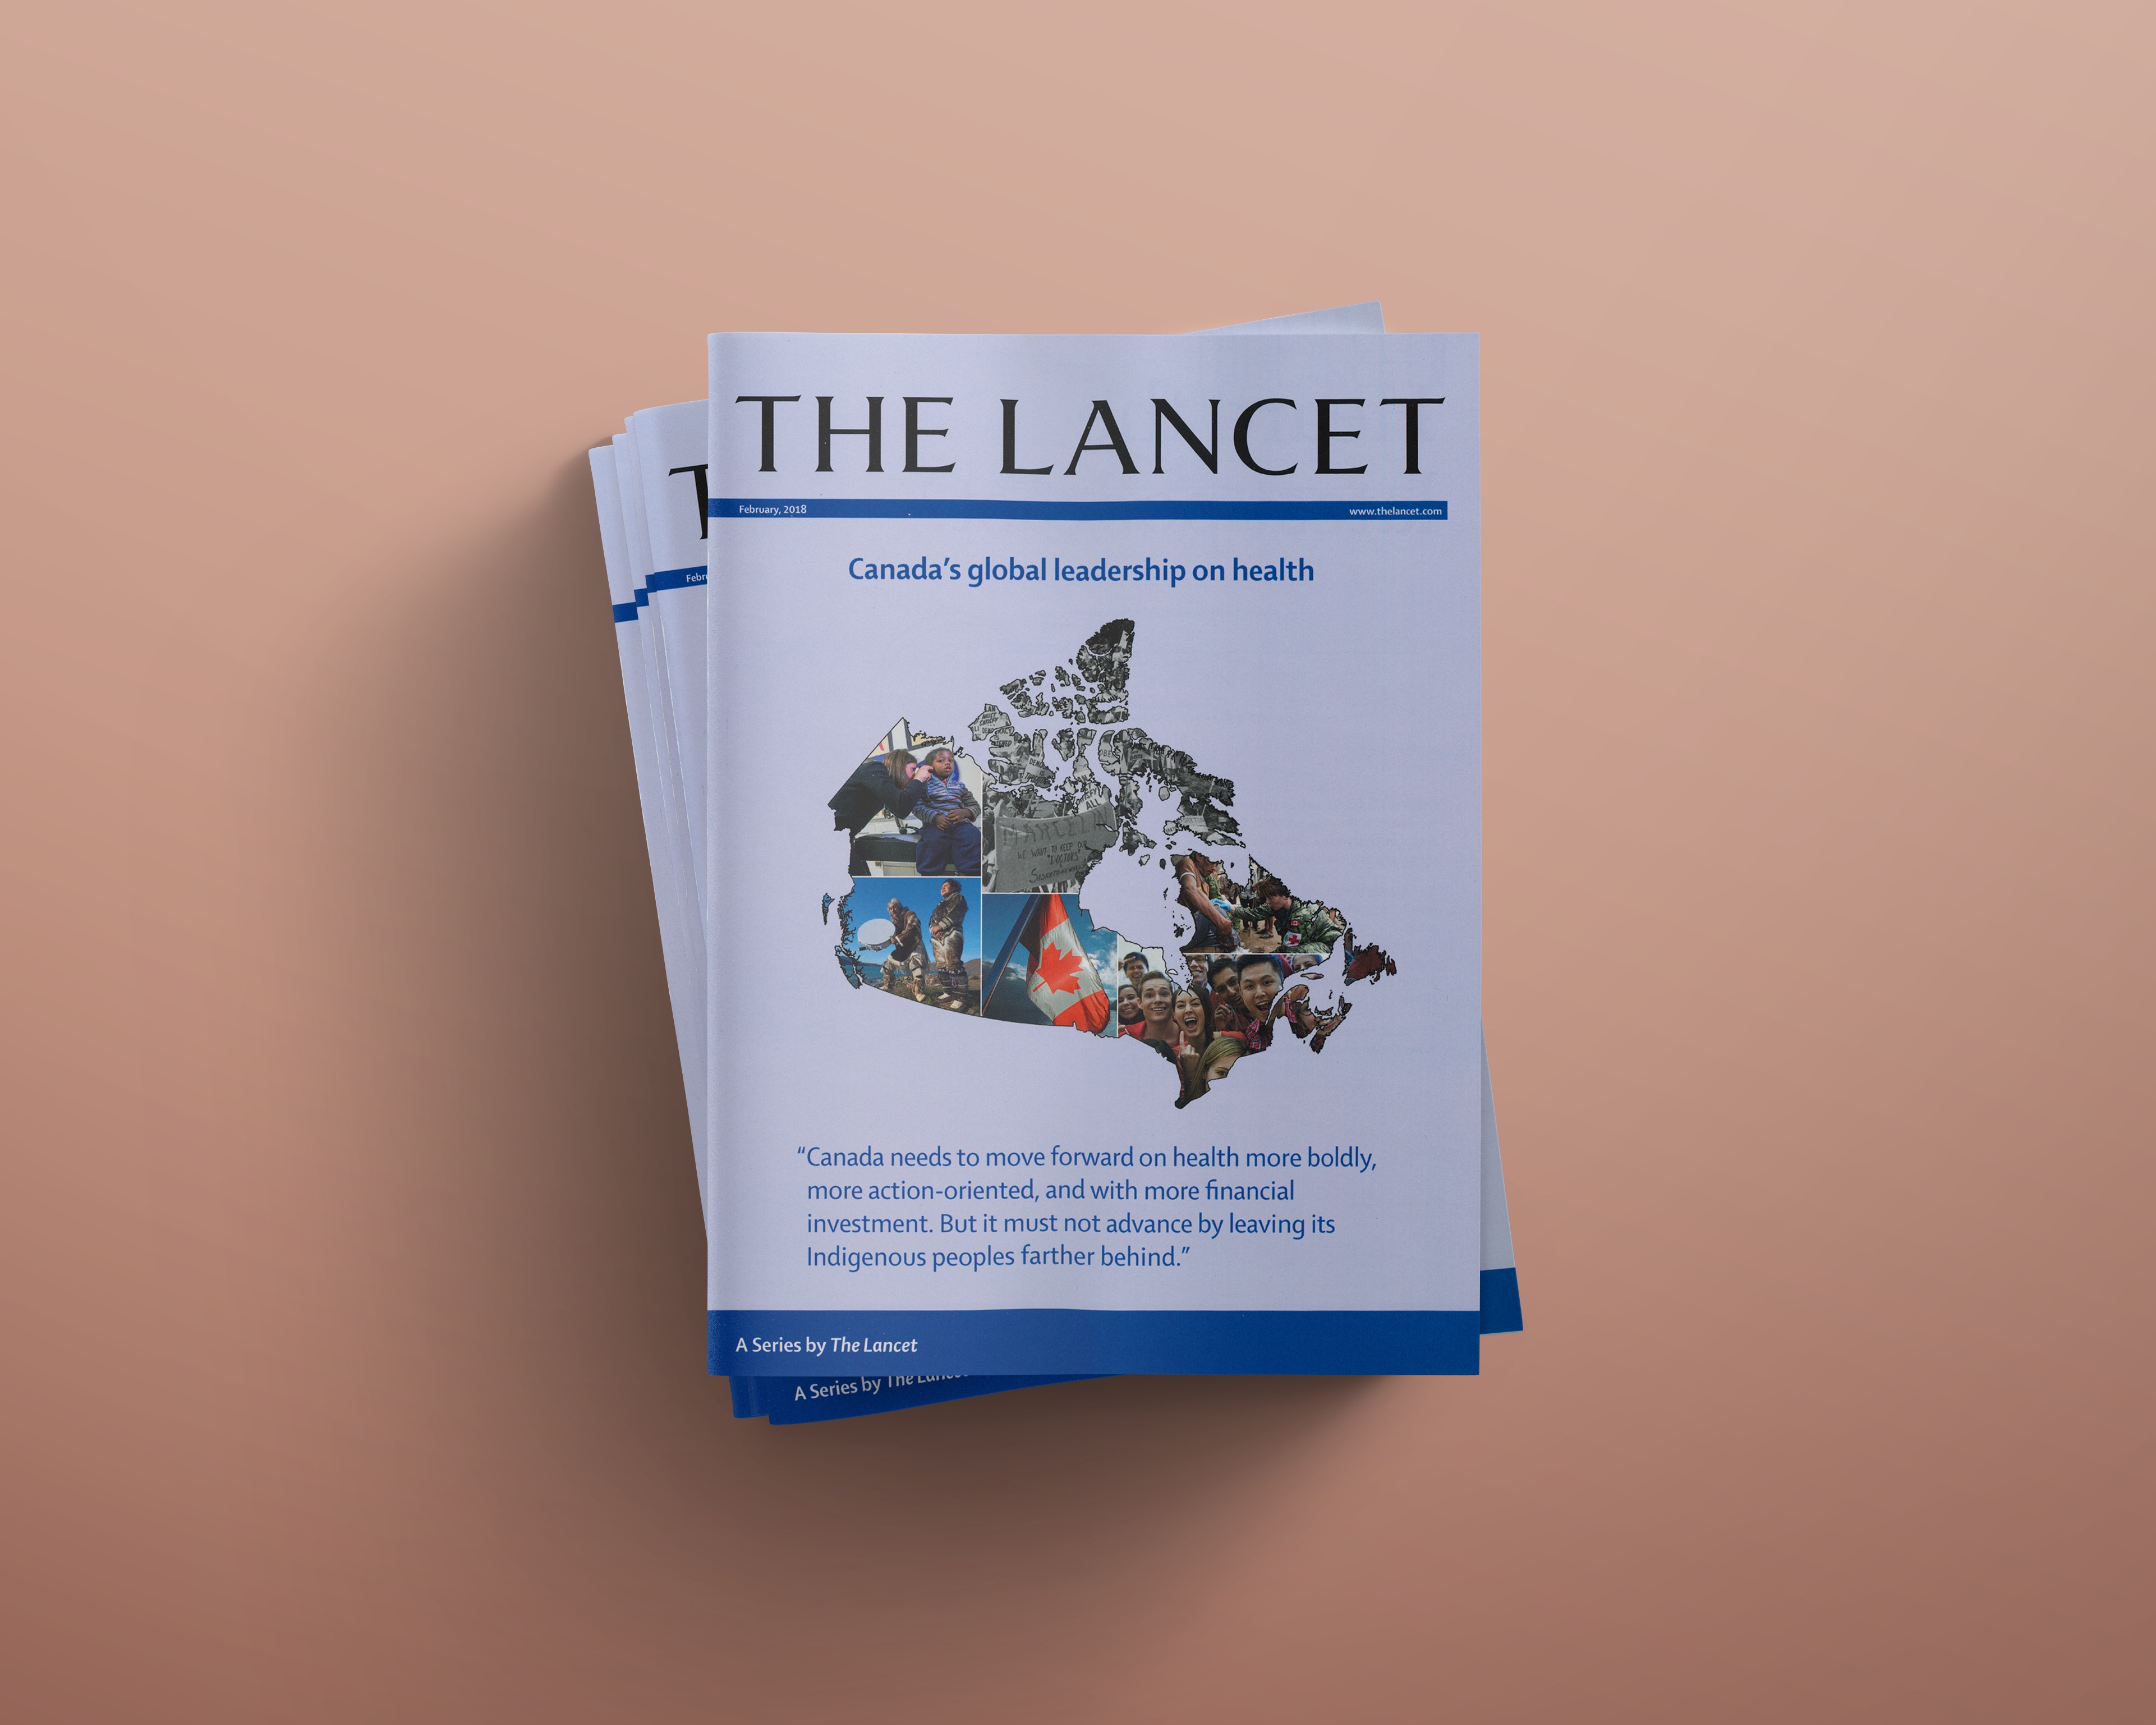 The Lancet's Canada issue.